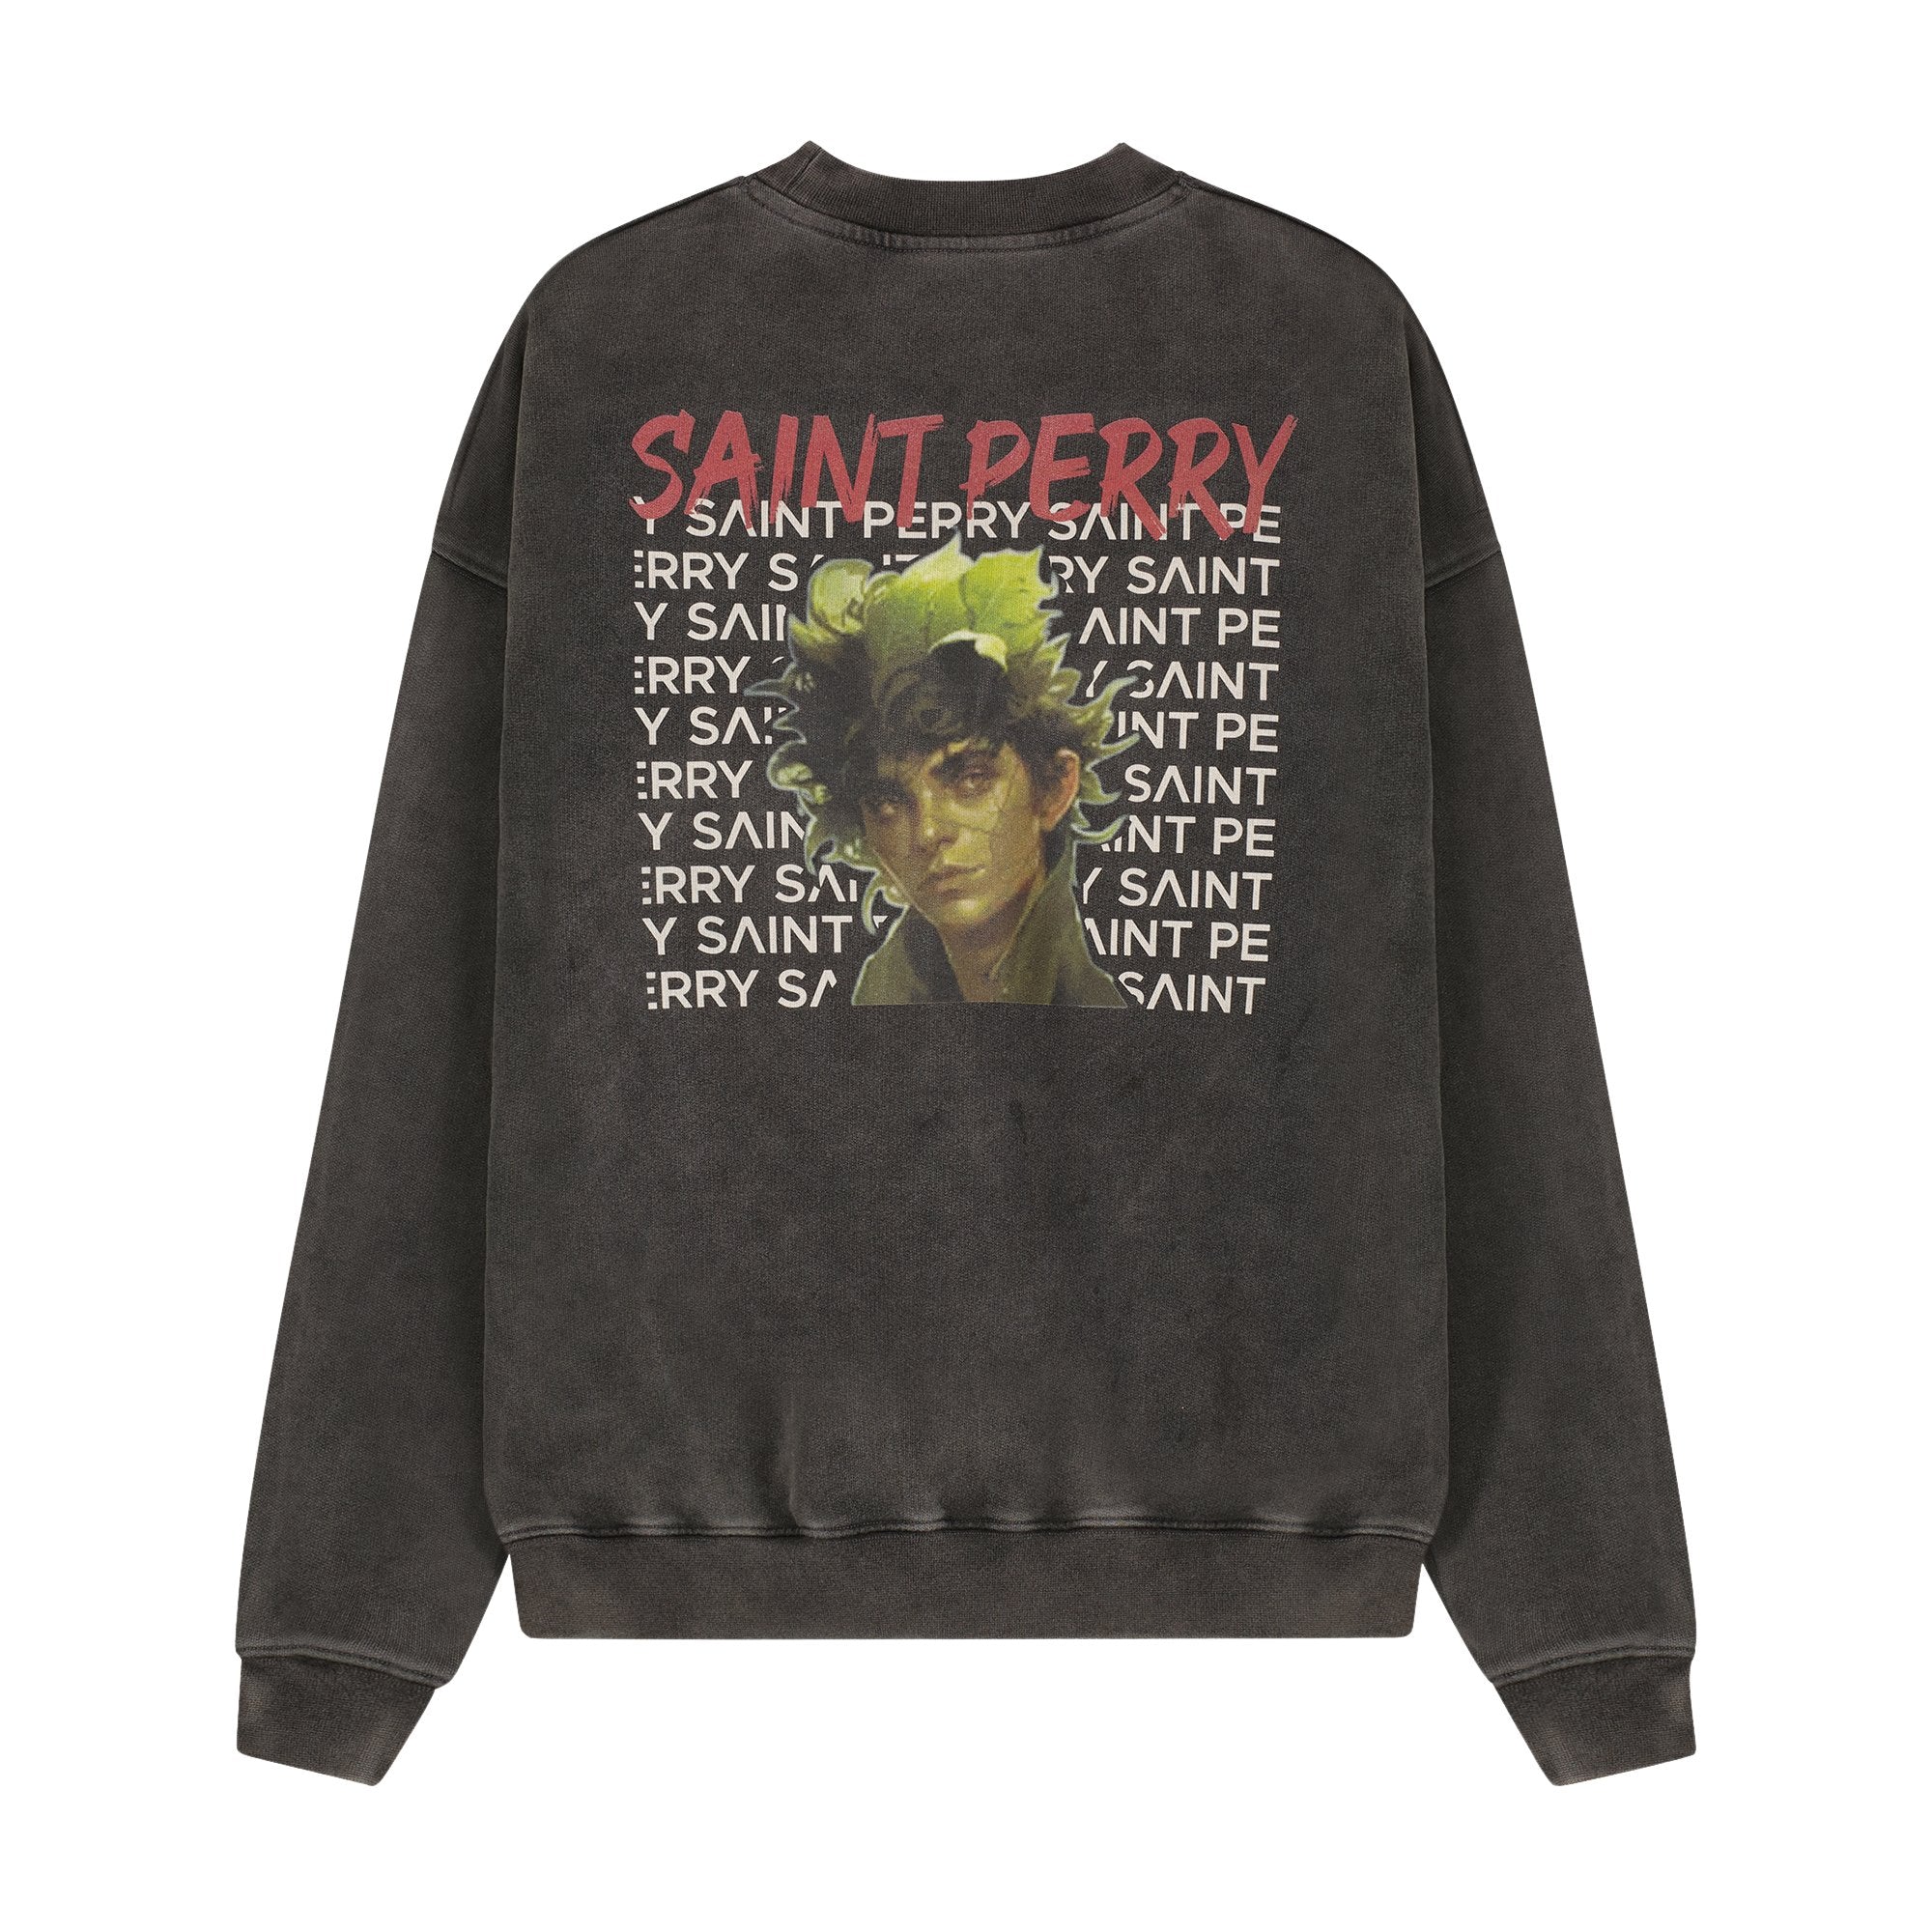 The Weed Punch Sweatshirt - SAINT PERRY